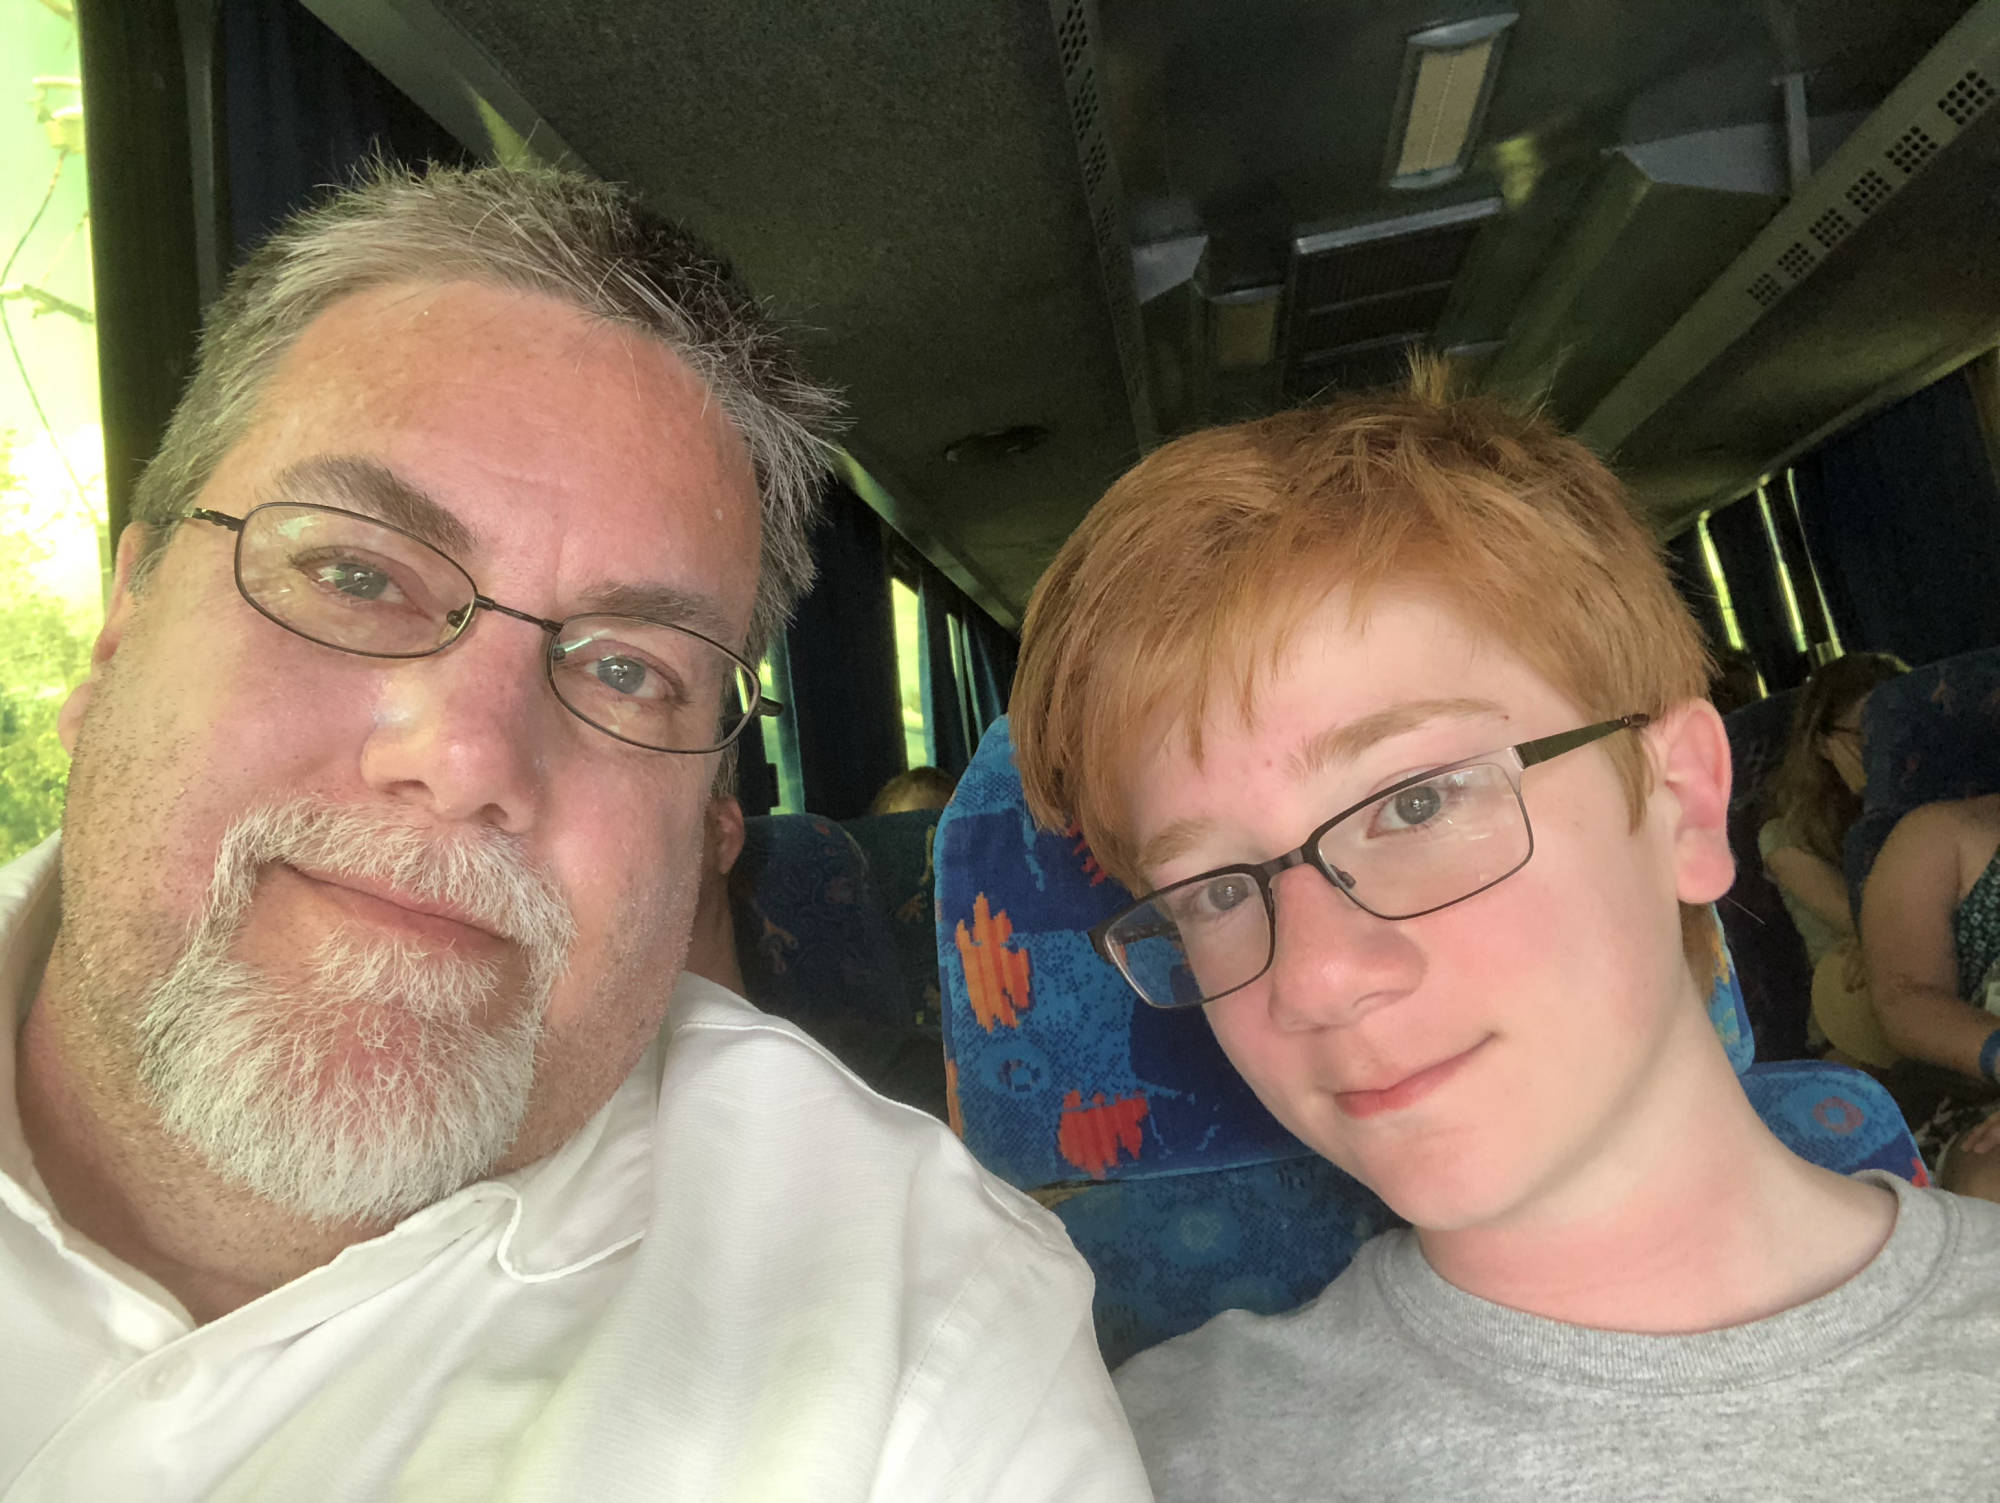 David Brodosi and his son traveling on a bus